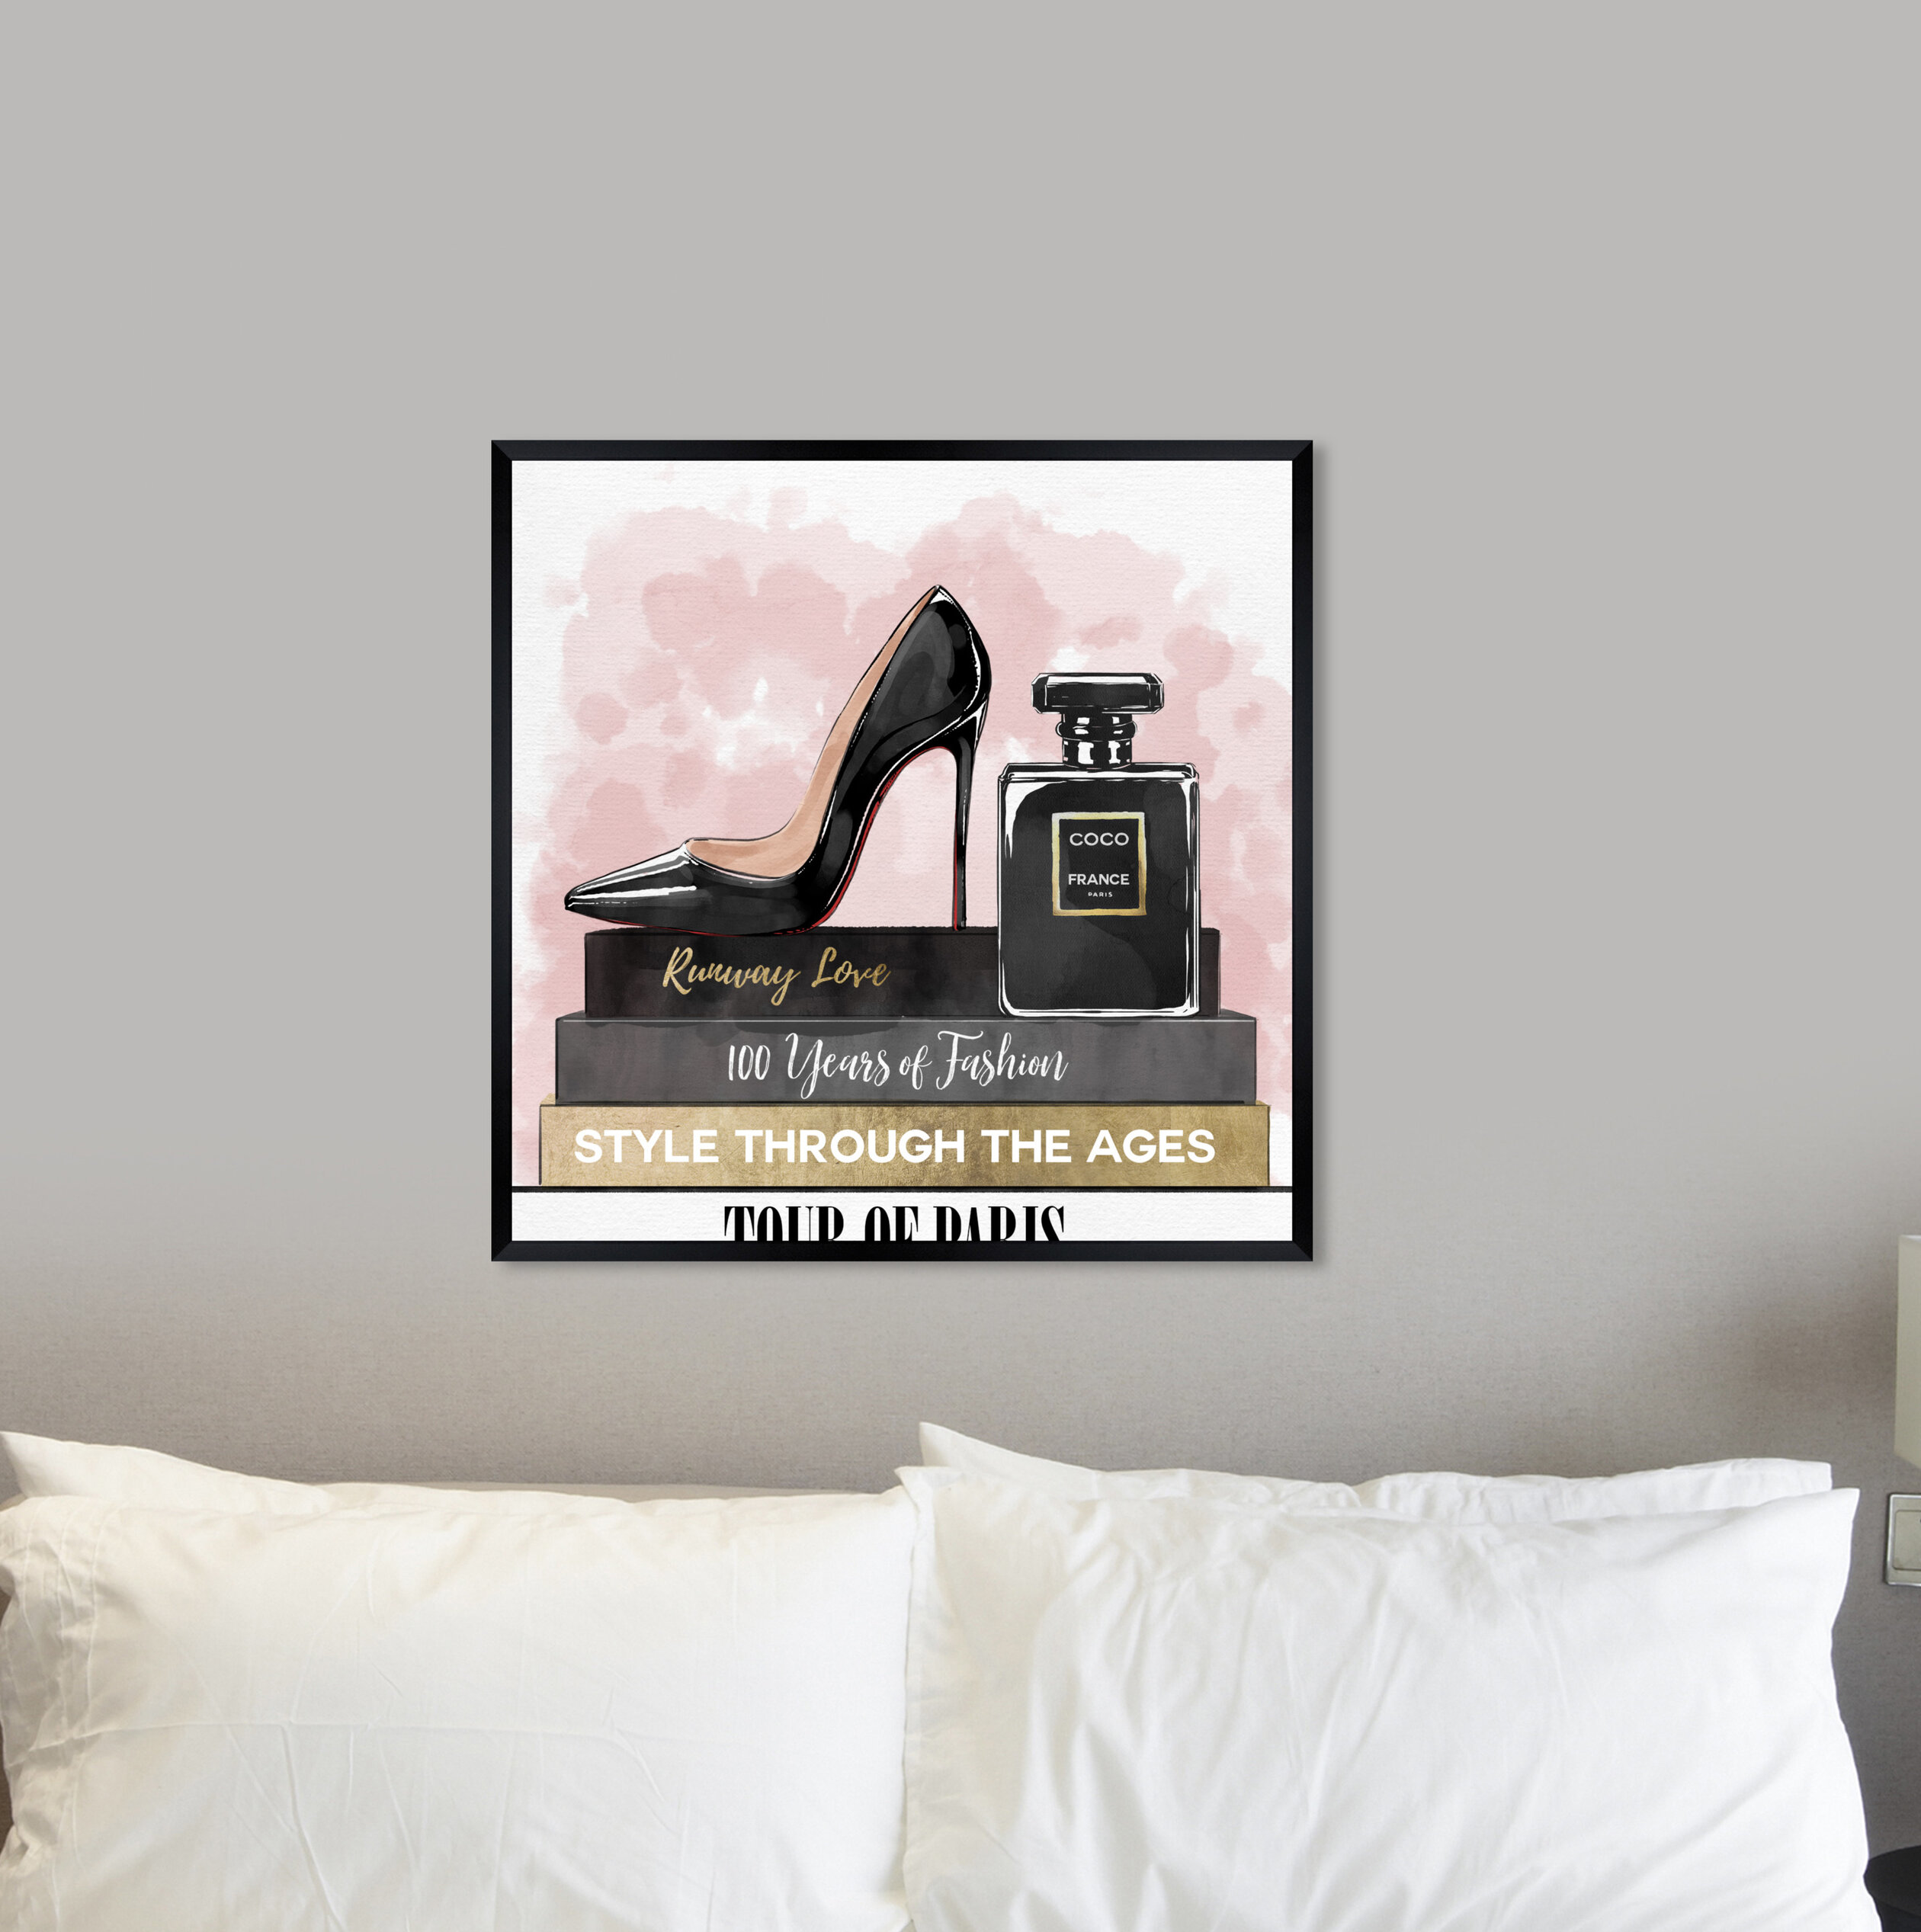 Oliver Gal '454 Strand Luxe' Fashion and Glam Wall Art Canvas